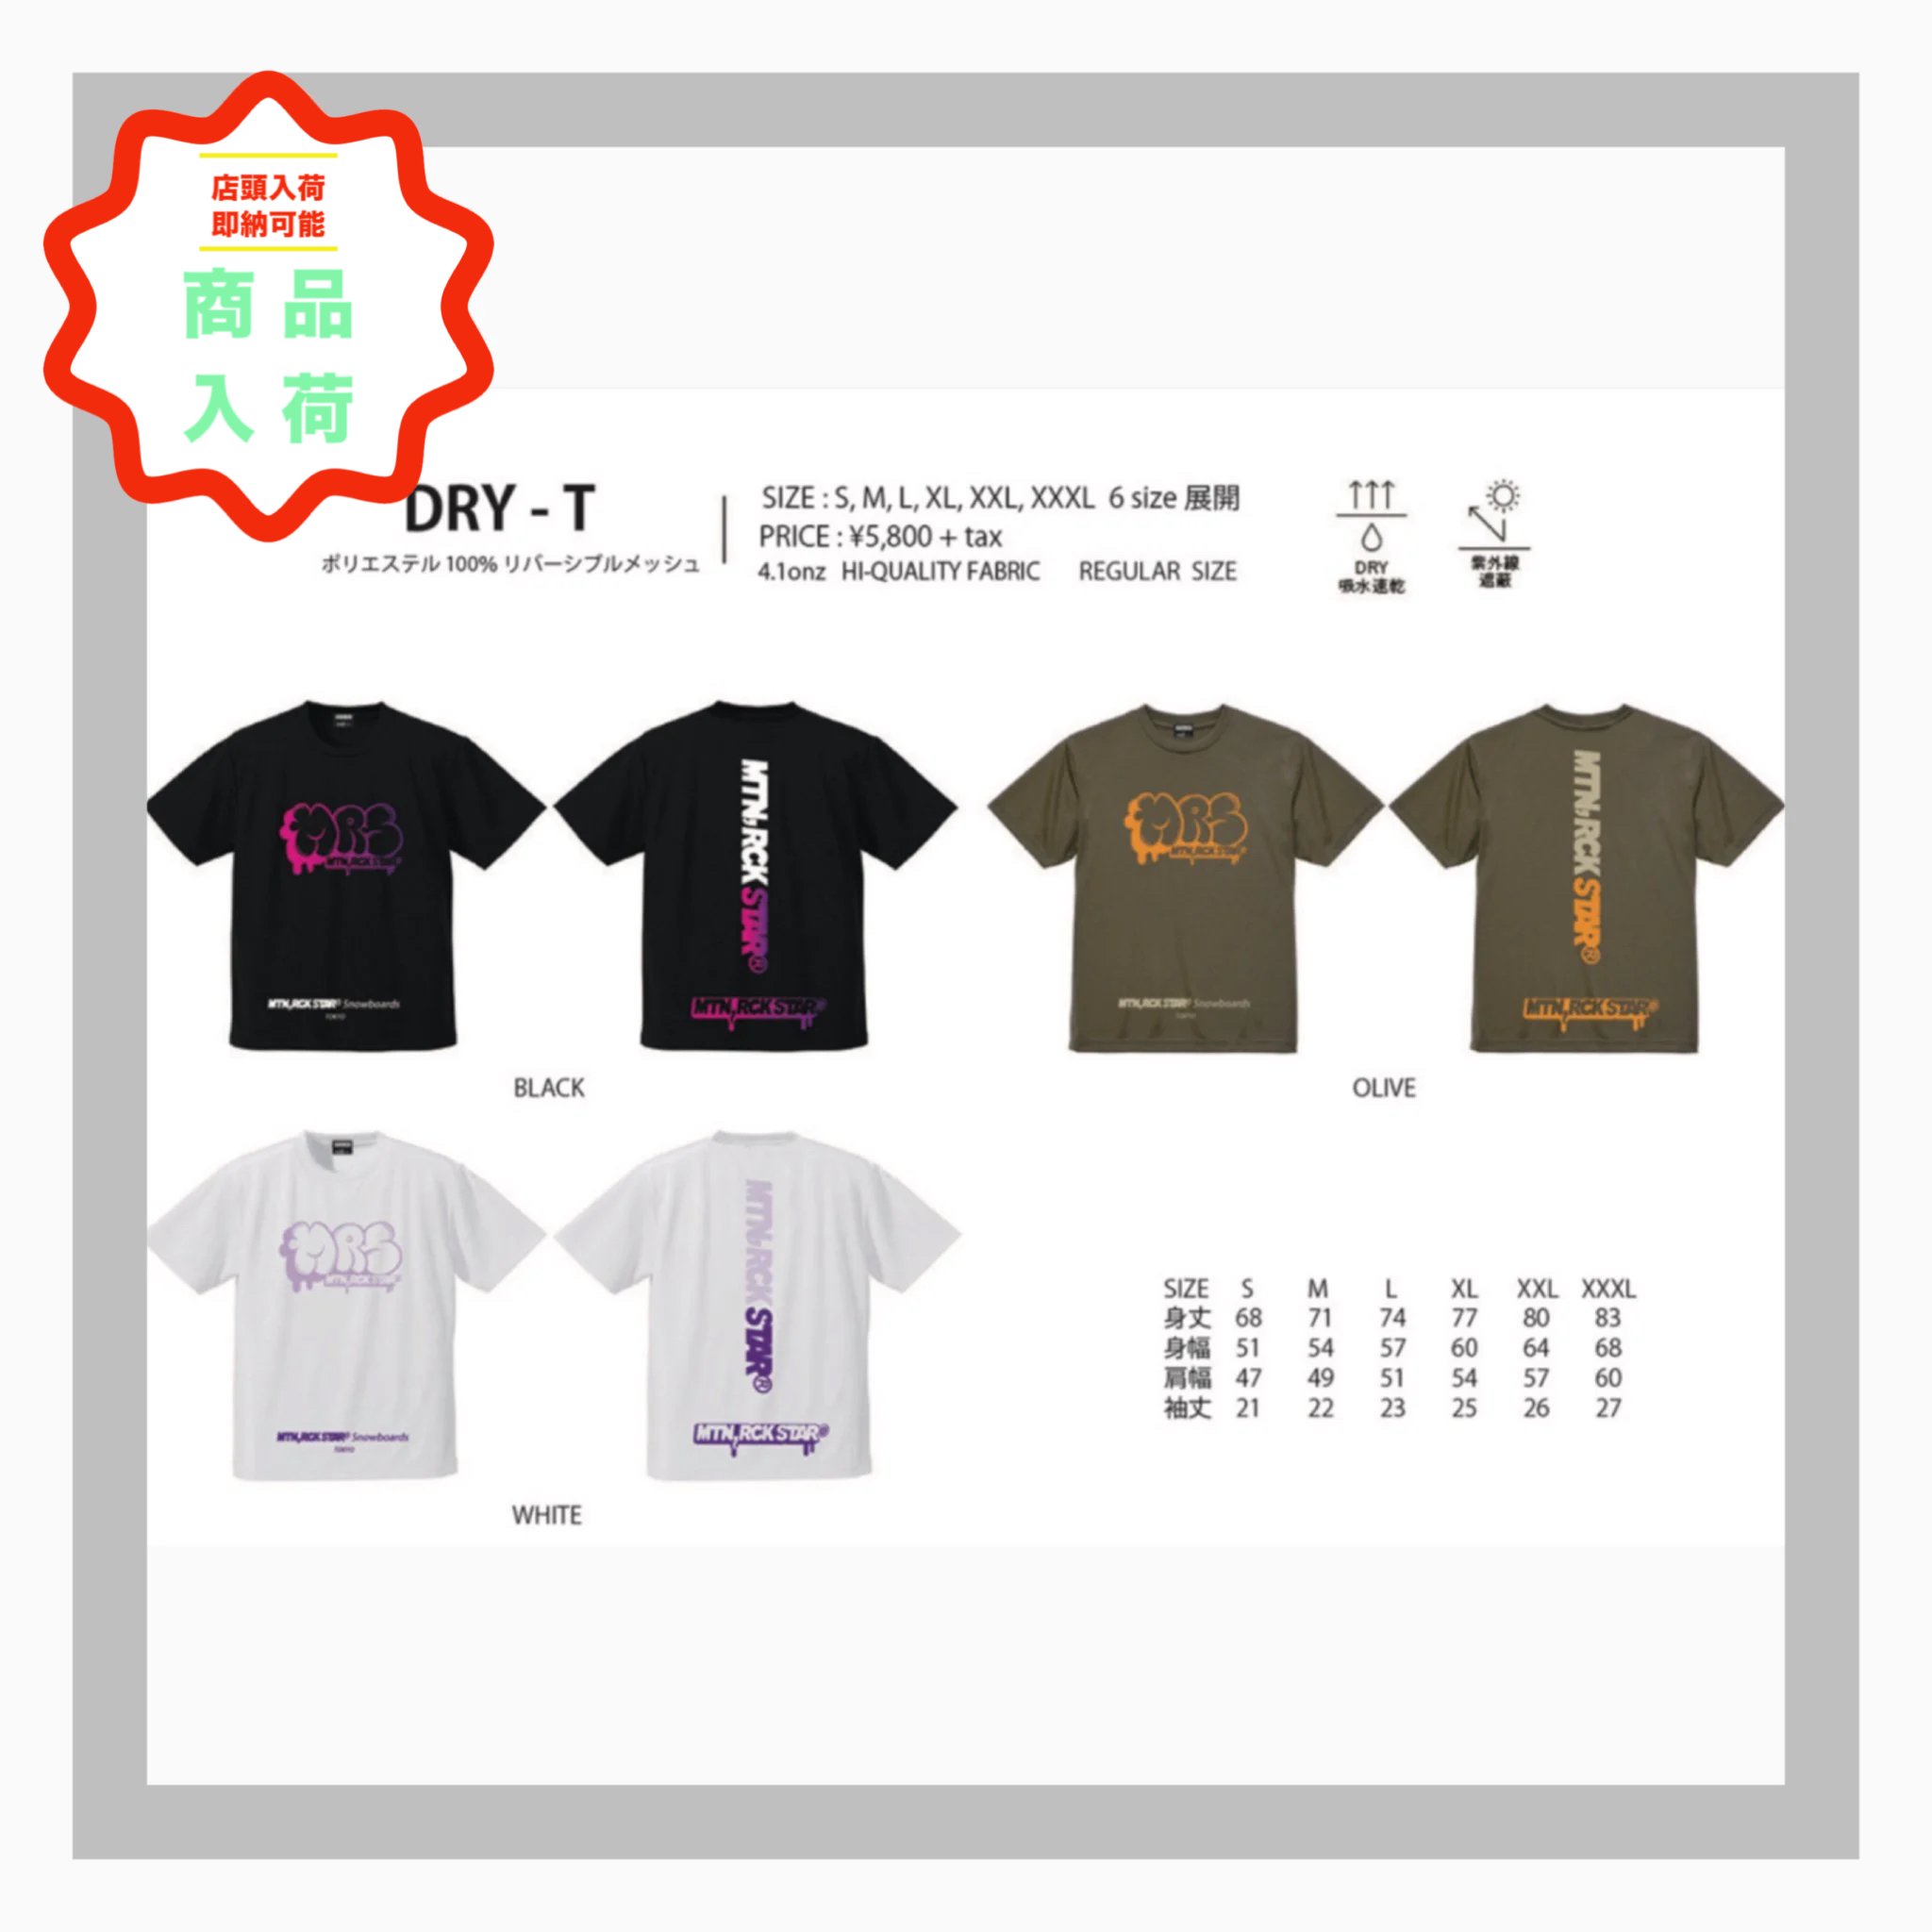 <img class='new_mark_img1' src='https://img.shop-pro.jp/img/new/icons14.gif' style='border:none;display:inline;margin:0px;padding:0px;width:auto;' />MOUNTAIN ROCK STAR HIGH SUMMER Apparel DRY -T